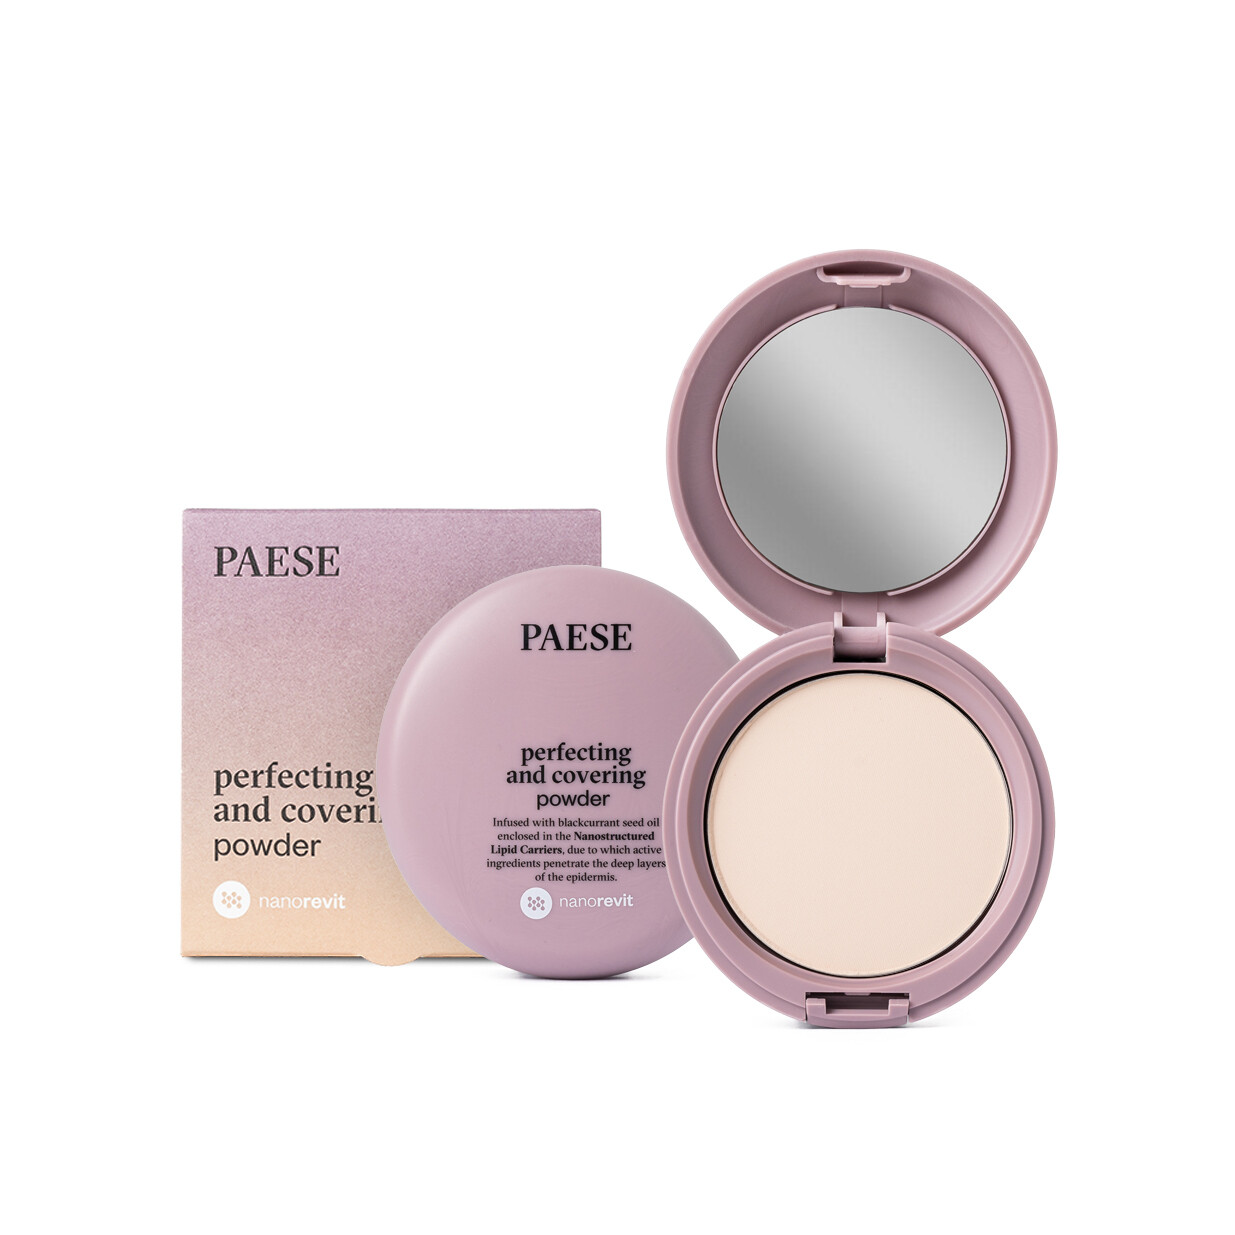 PŪDERIS - PAESE NANOREVIT PERFECTING AND COVERING POWDER